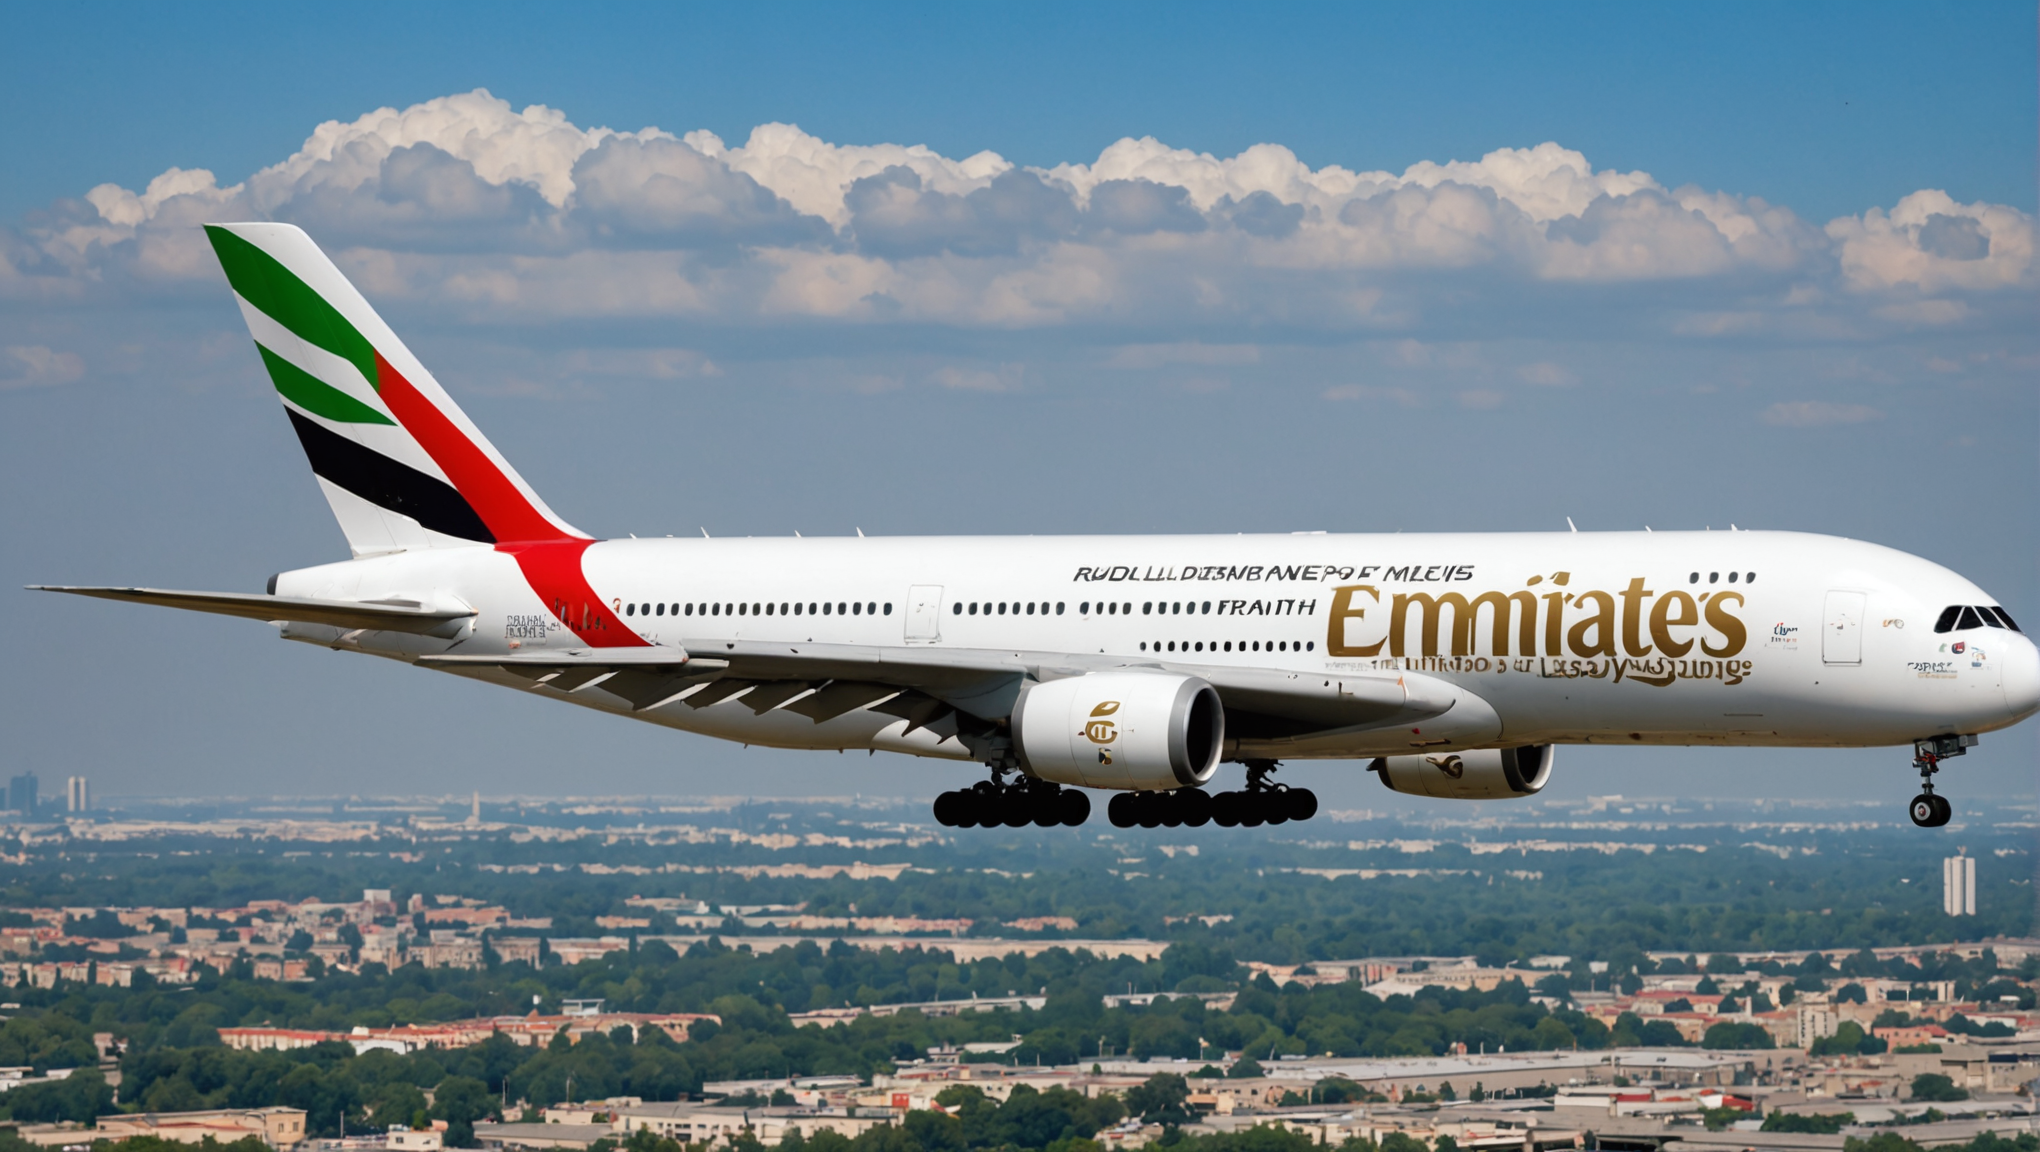 discover exciting career opportunities at emirates during its recruitment days this July for aviation enthusiasts.